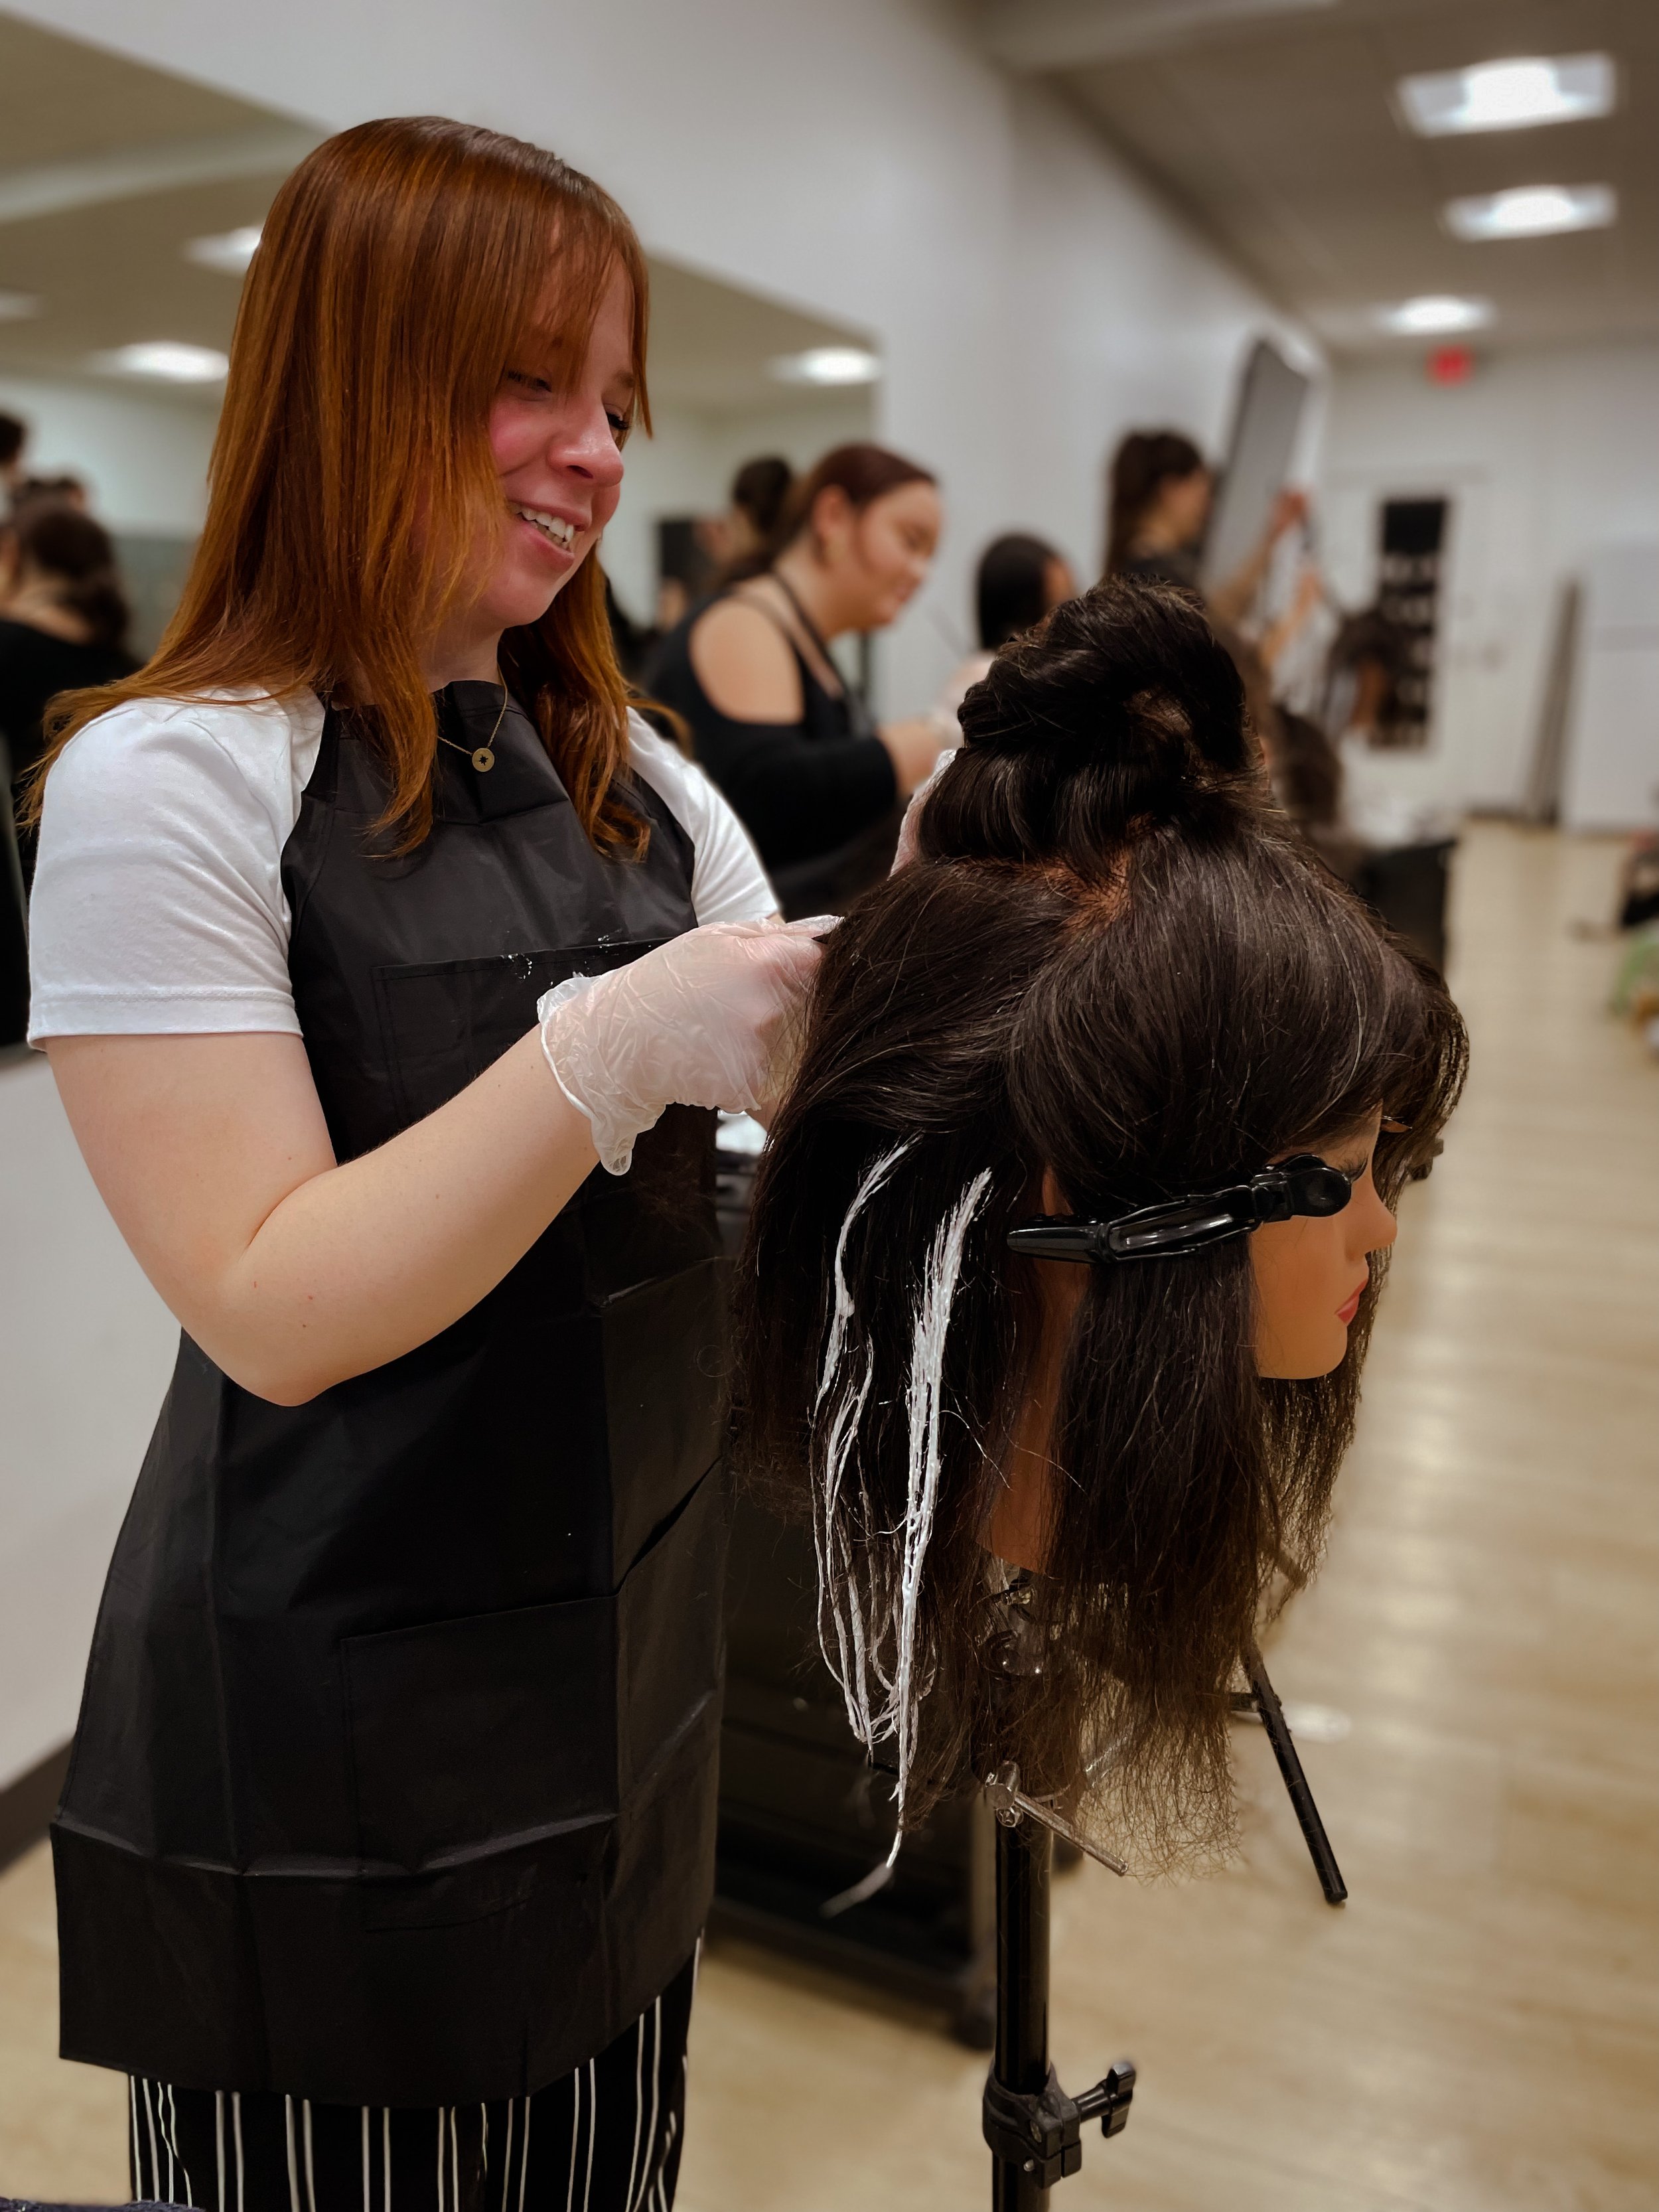 LEARN THE SKILLS OF COSMETOLOGY